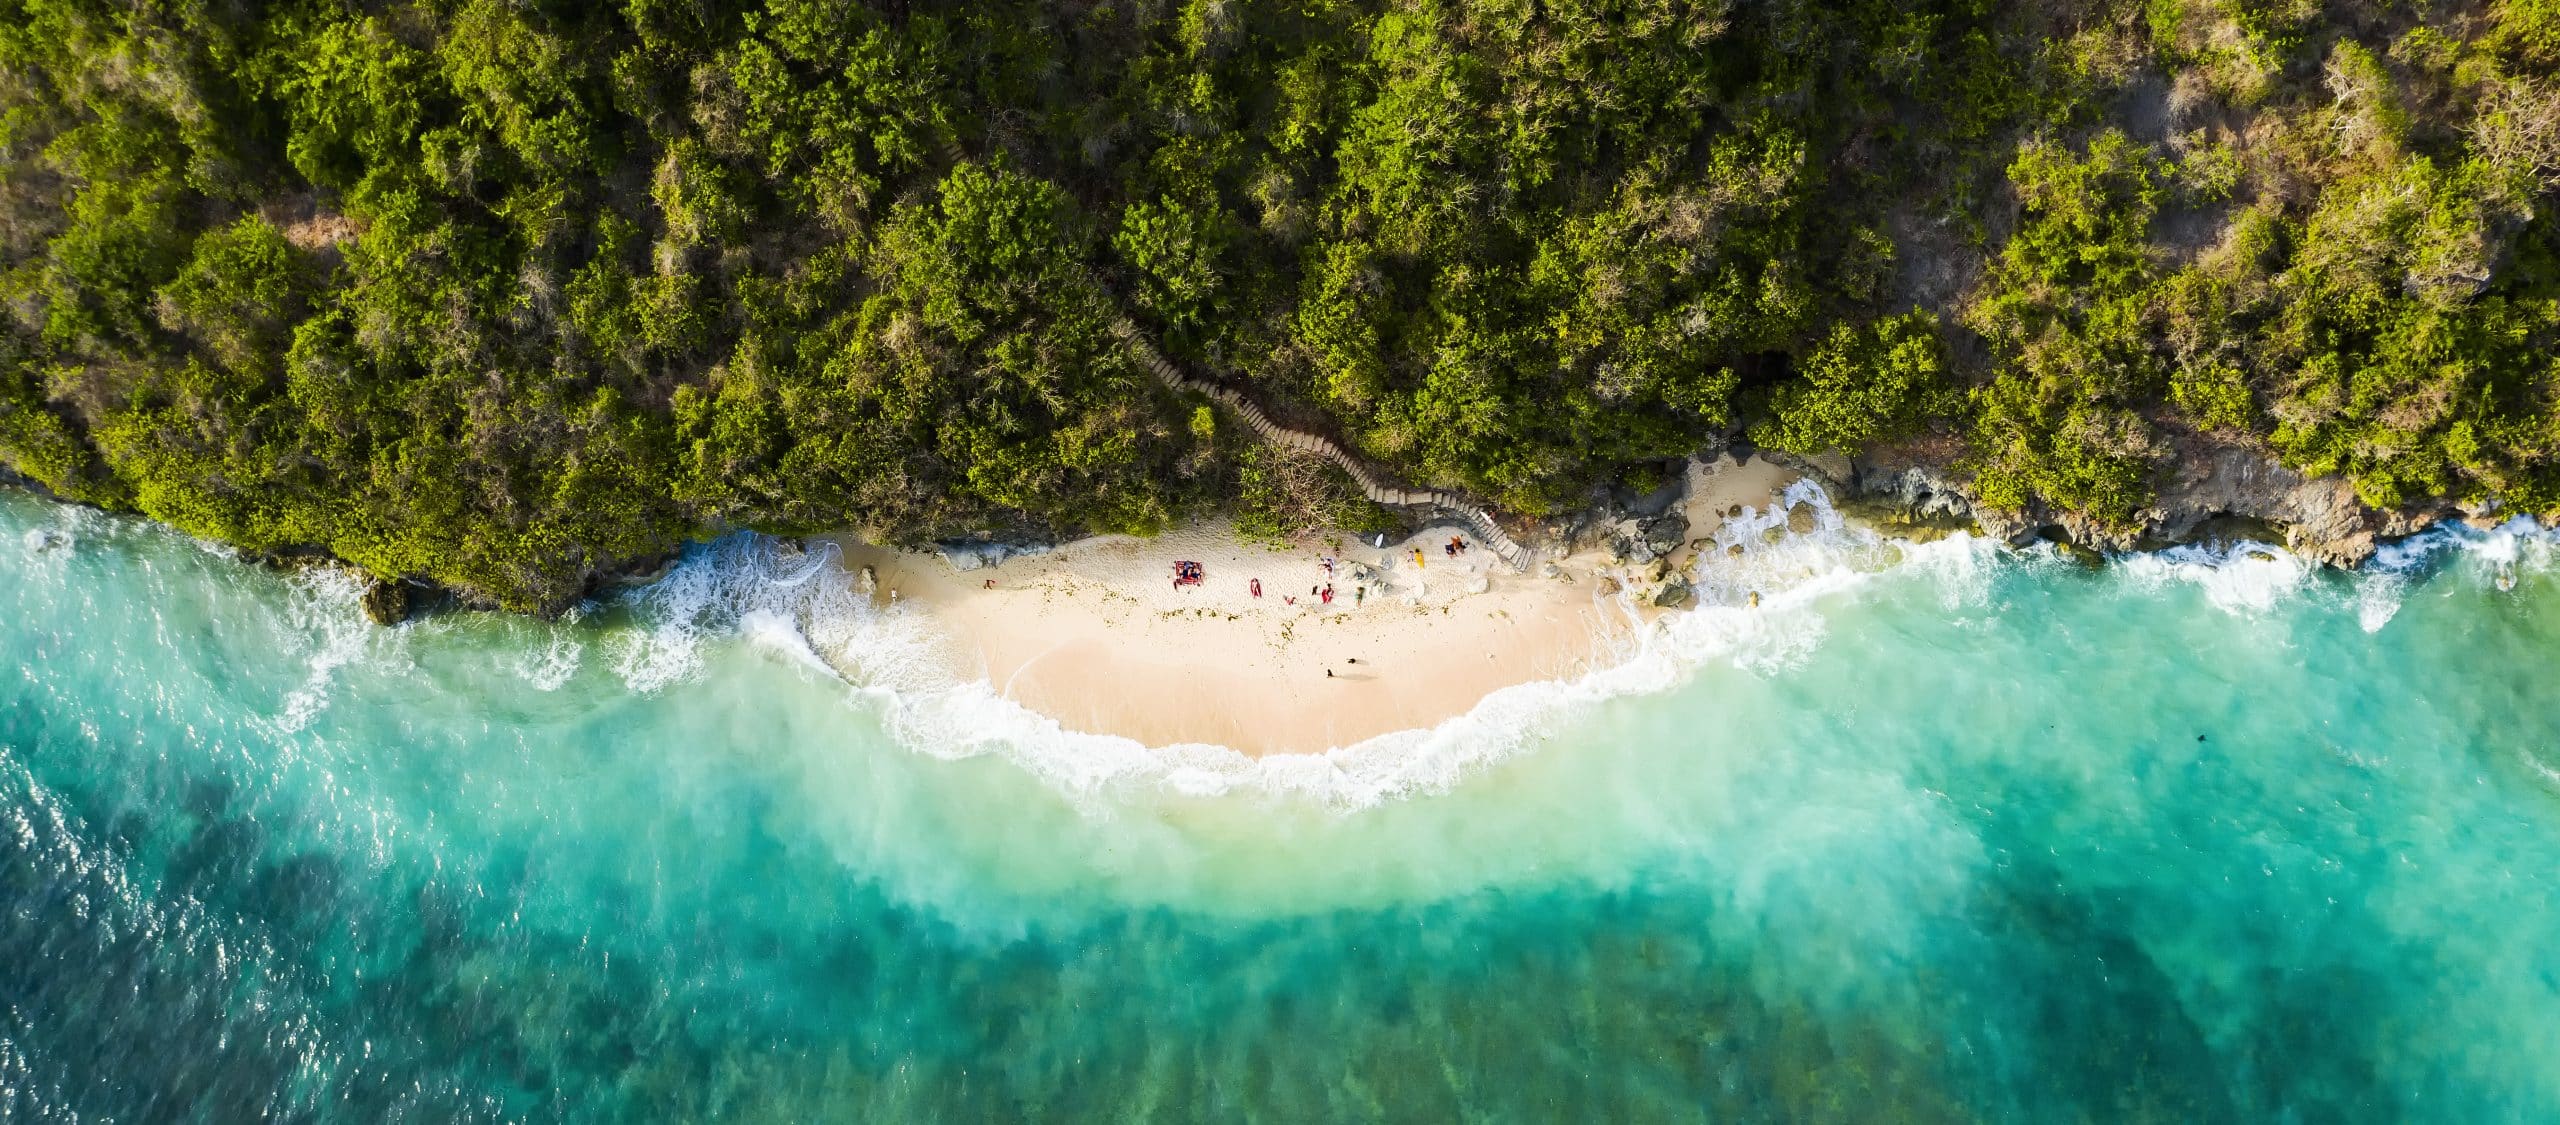 View from above, stunning aerial view of some tourists sunbathing on a beautiful beach bathed by a turquoise rough sea during sunset, Topan Beach, South Bali, Indonesia.